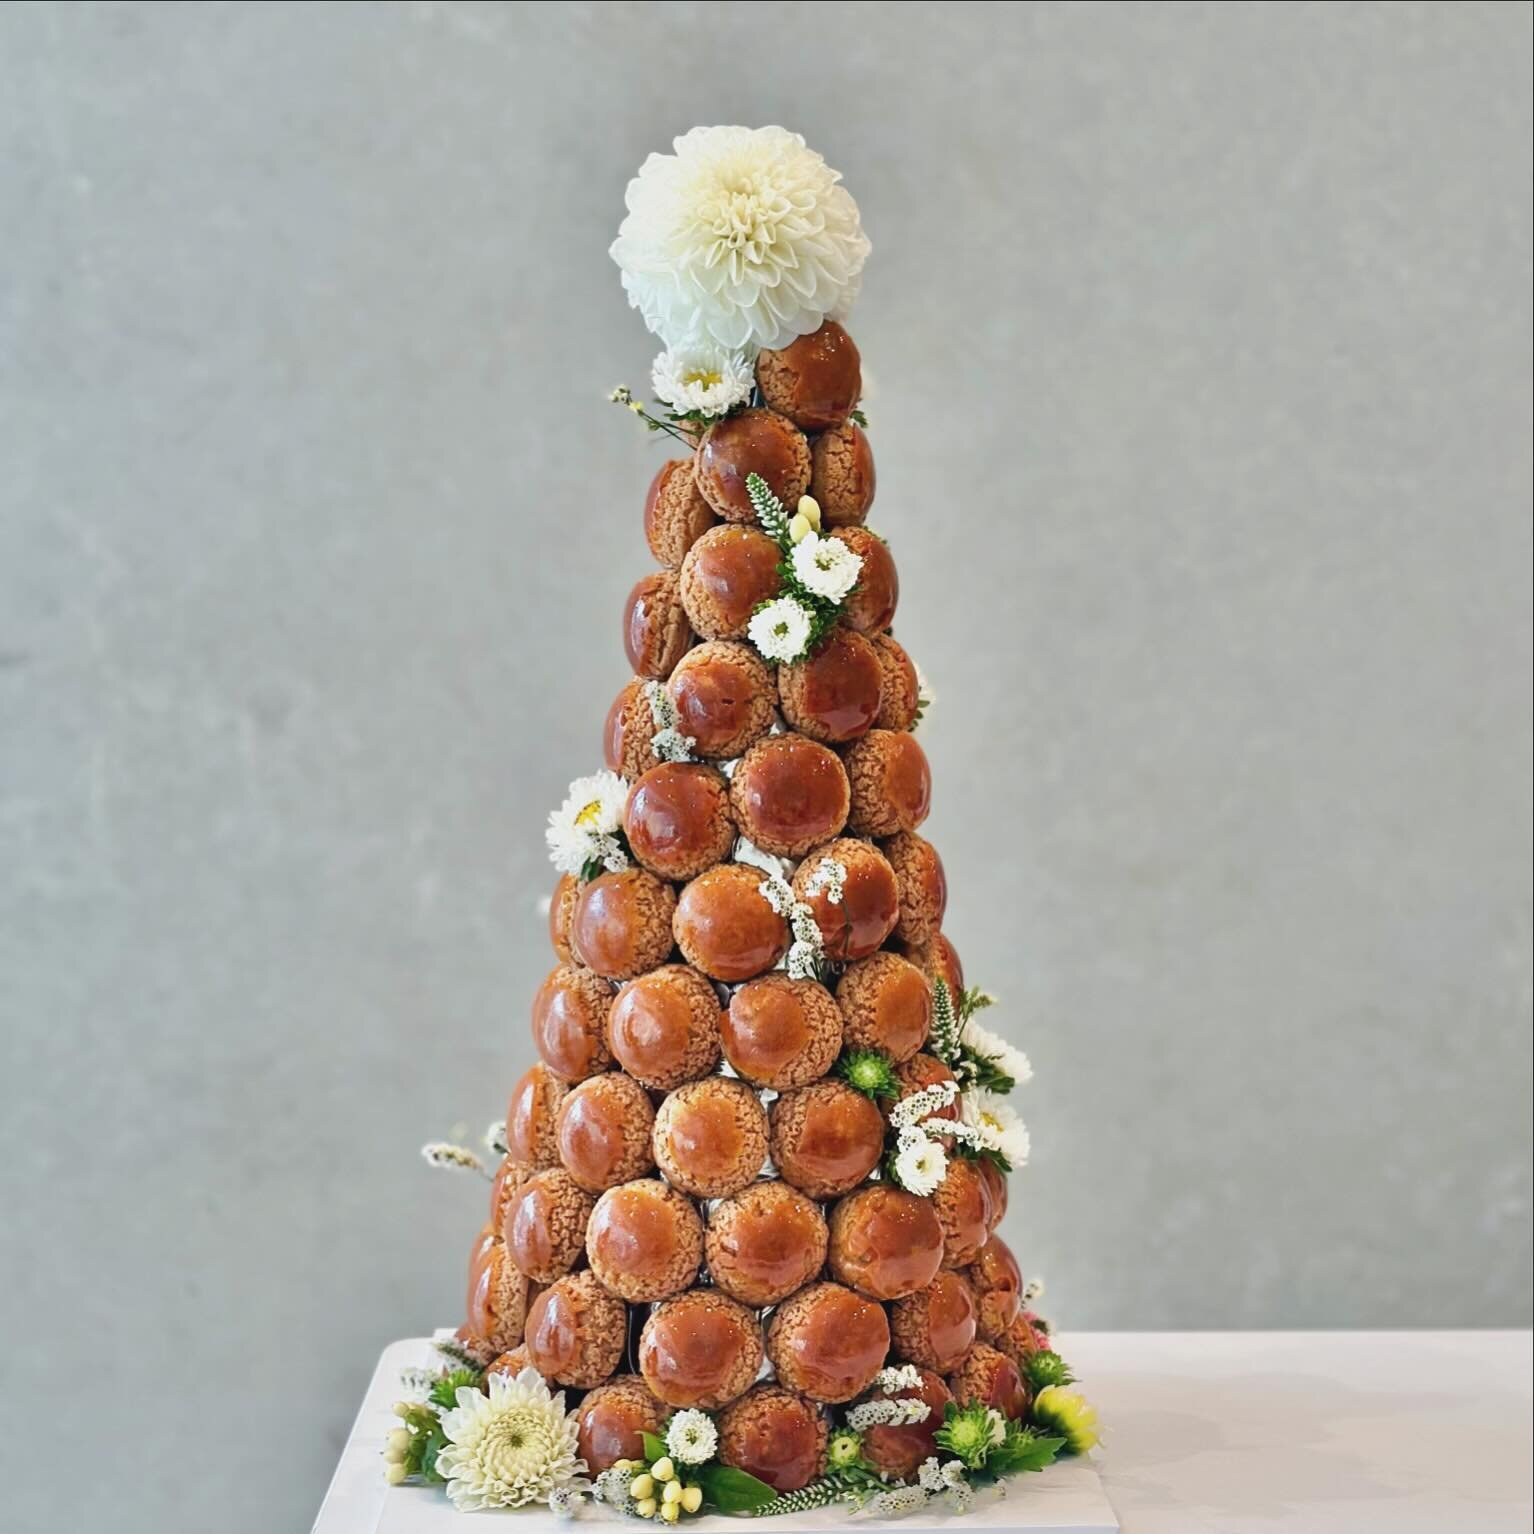 A Classic Perfected from our boutique for your special day.

A unique way to share the love with this bespoke croquembouche.

Gluten free available.

#christchurchnz #otautahi #canterburynz #bespokecakes  #bespokedesserts #pastrylife #pastrychef #foo